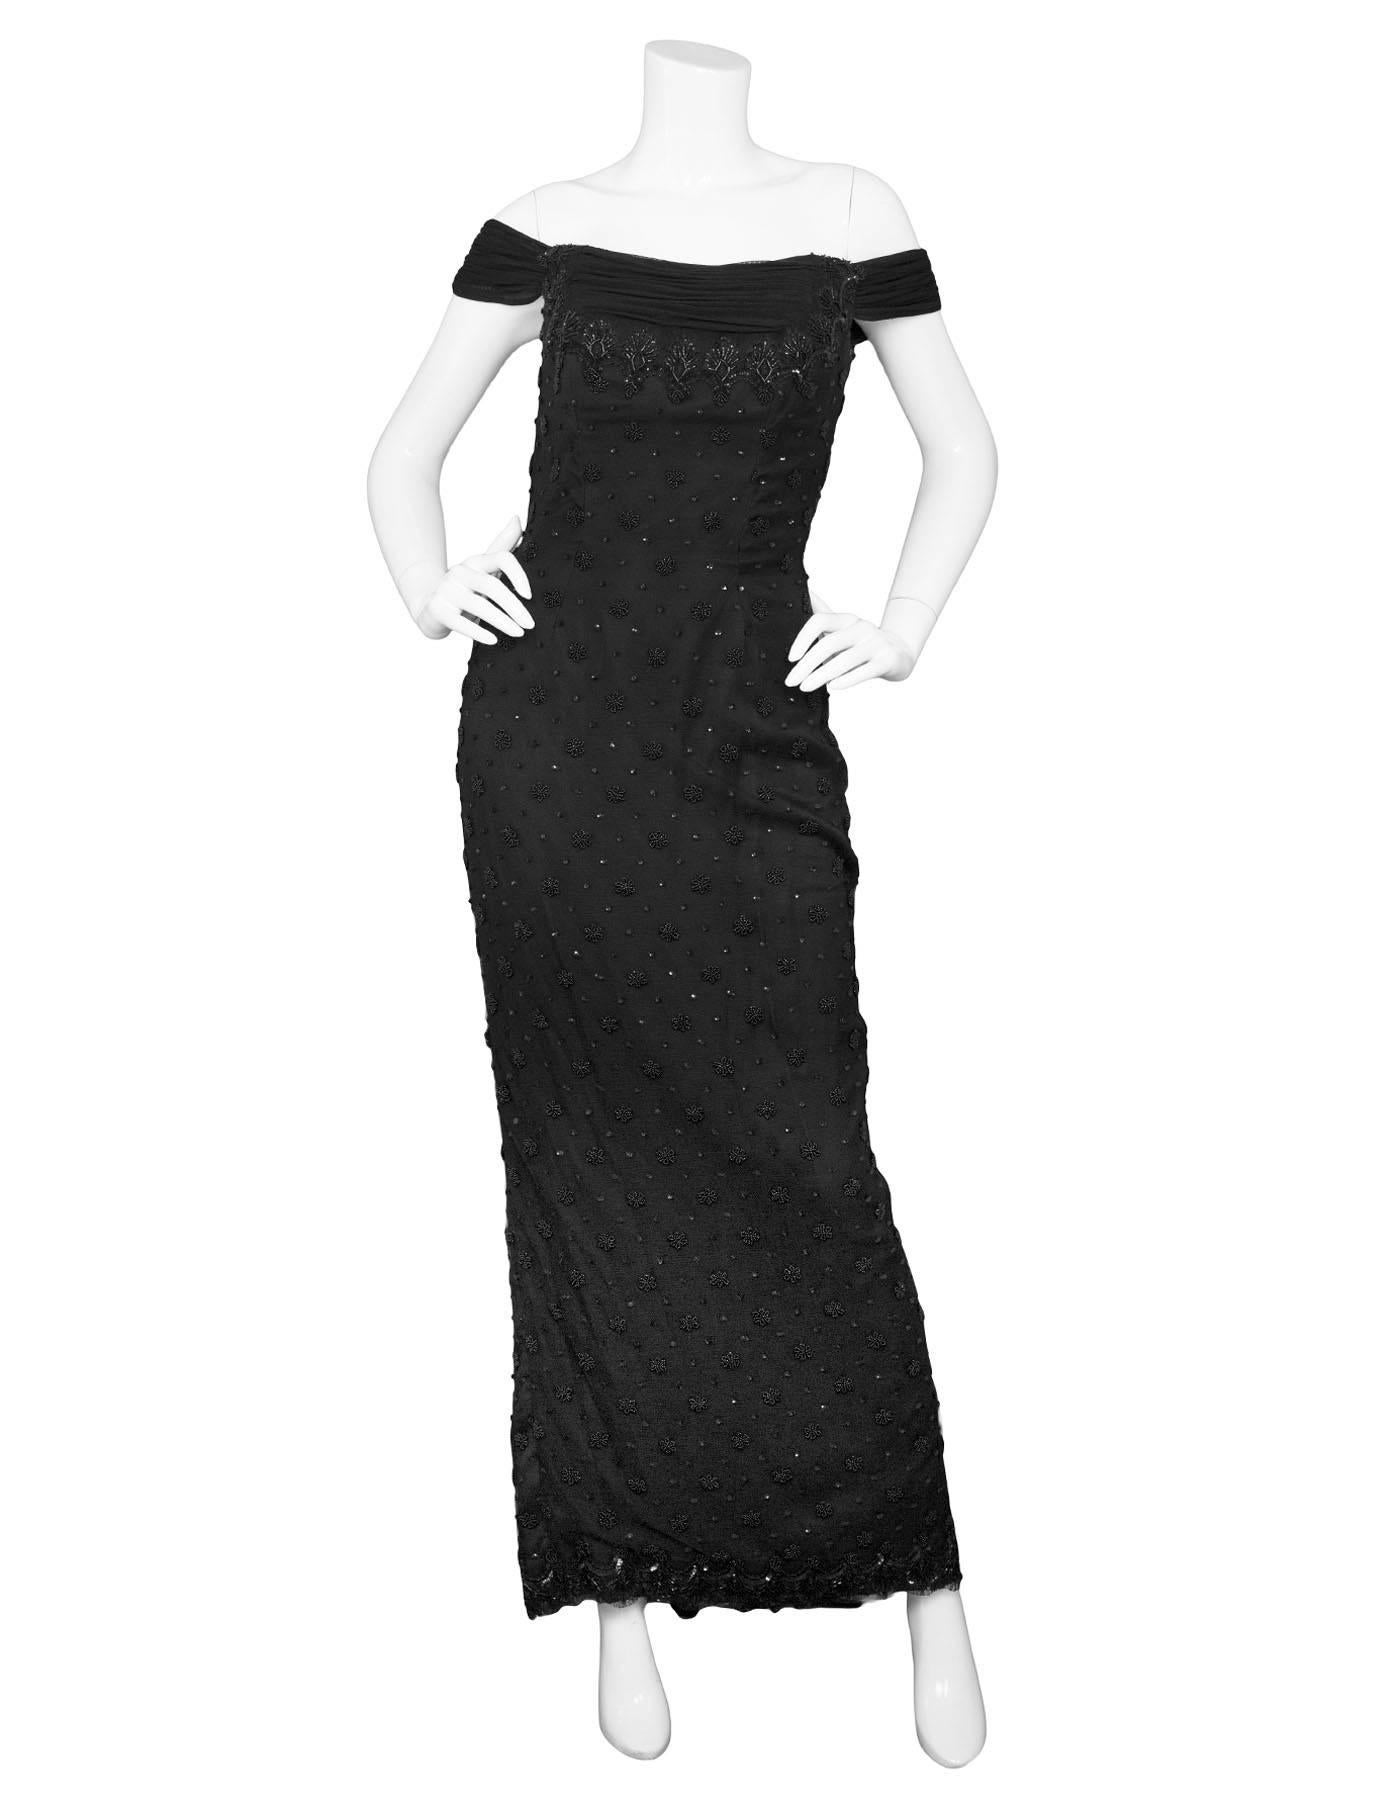 Vicky Tiel Black Beaded Gown Sz 6
Features boning in bodice with beading and sequins throughout

Made In: France
Color: Black
Composition: Rayon, nylon blend
Lining: Black textile
Closure/Opening: Back zip closure
Retail Price: $6,000 + tax
Overall